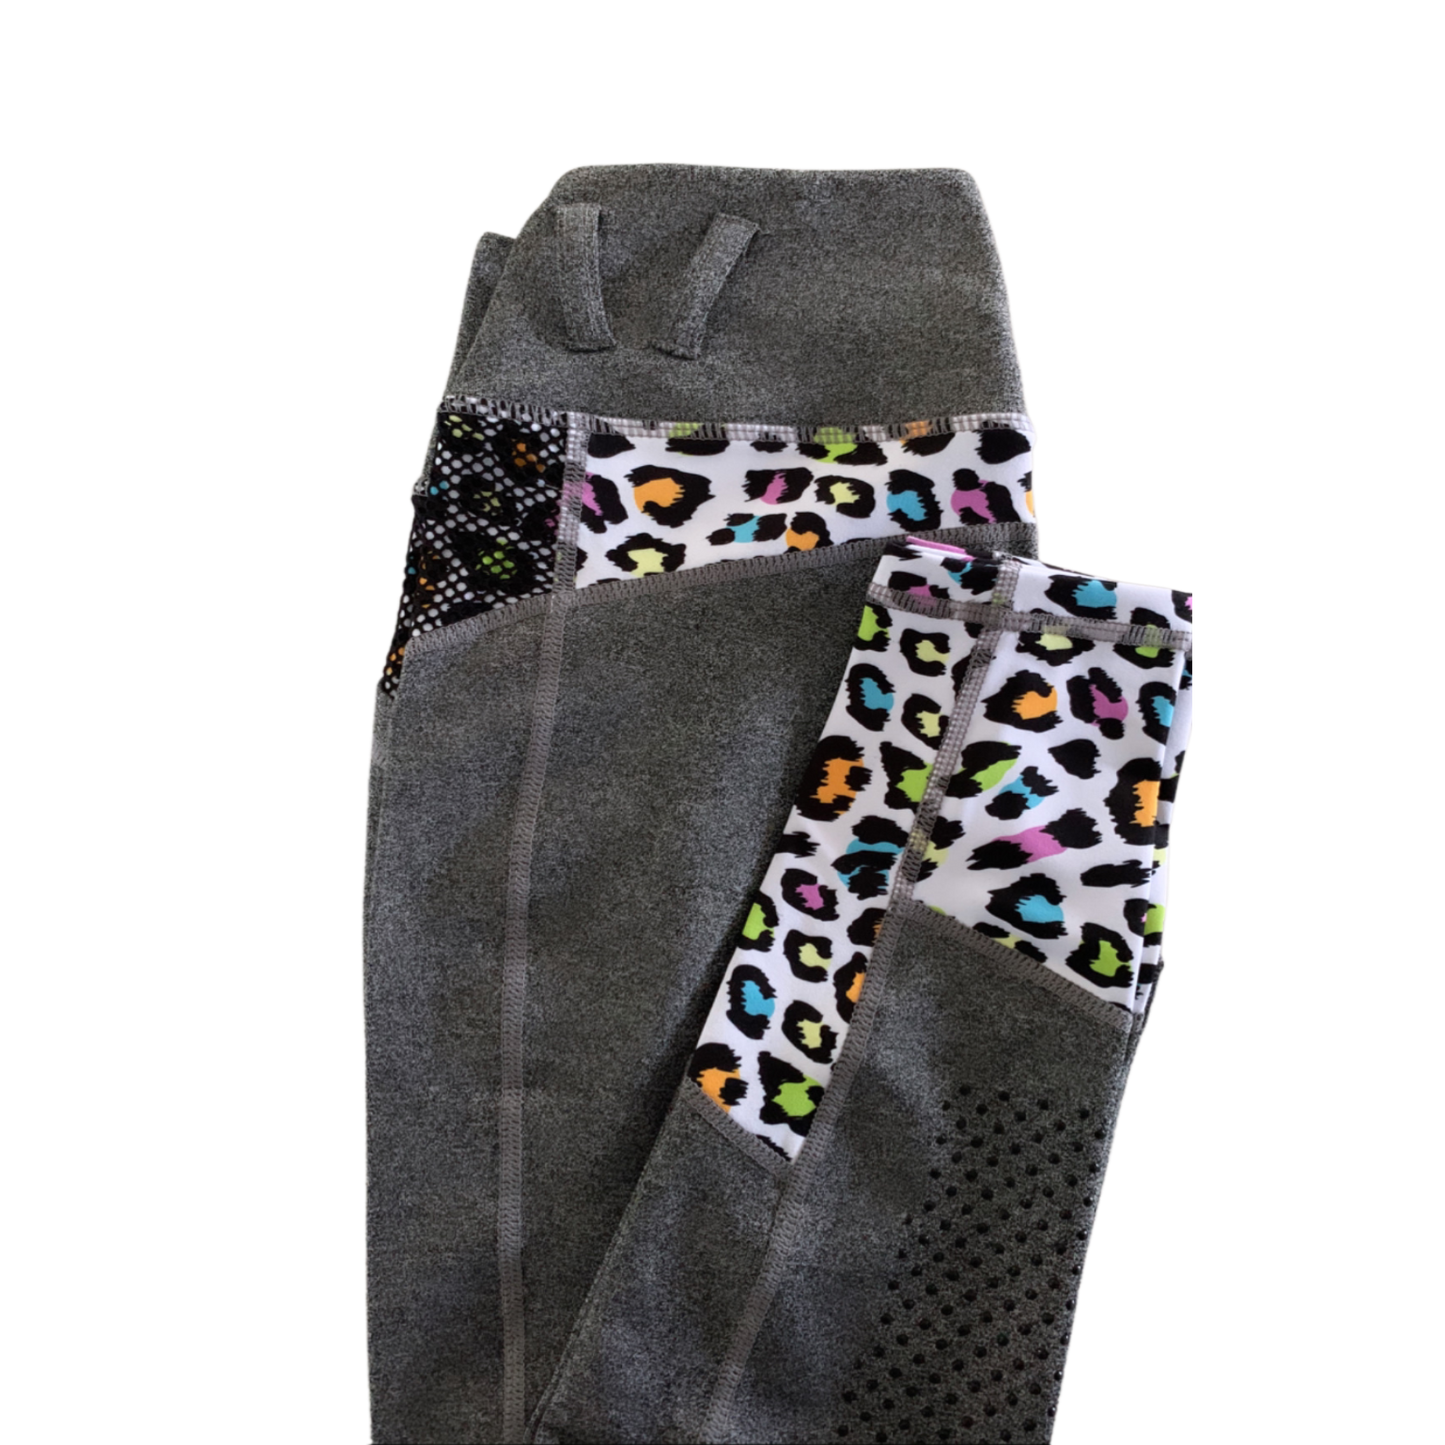 Folded gray horse riding tights with colorful waistband on black background.